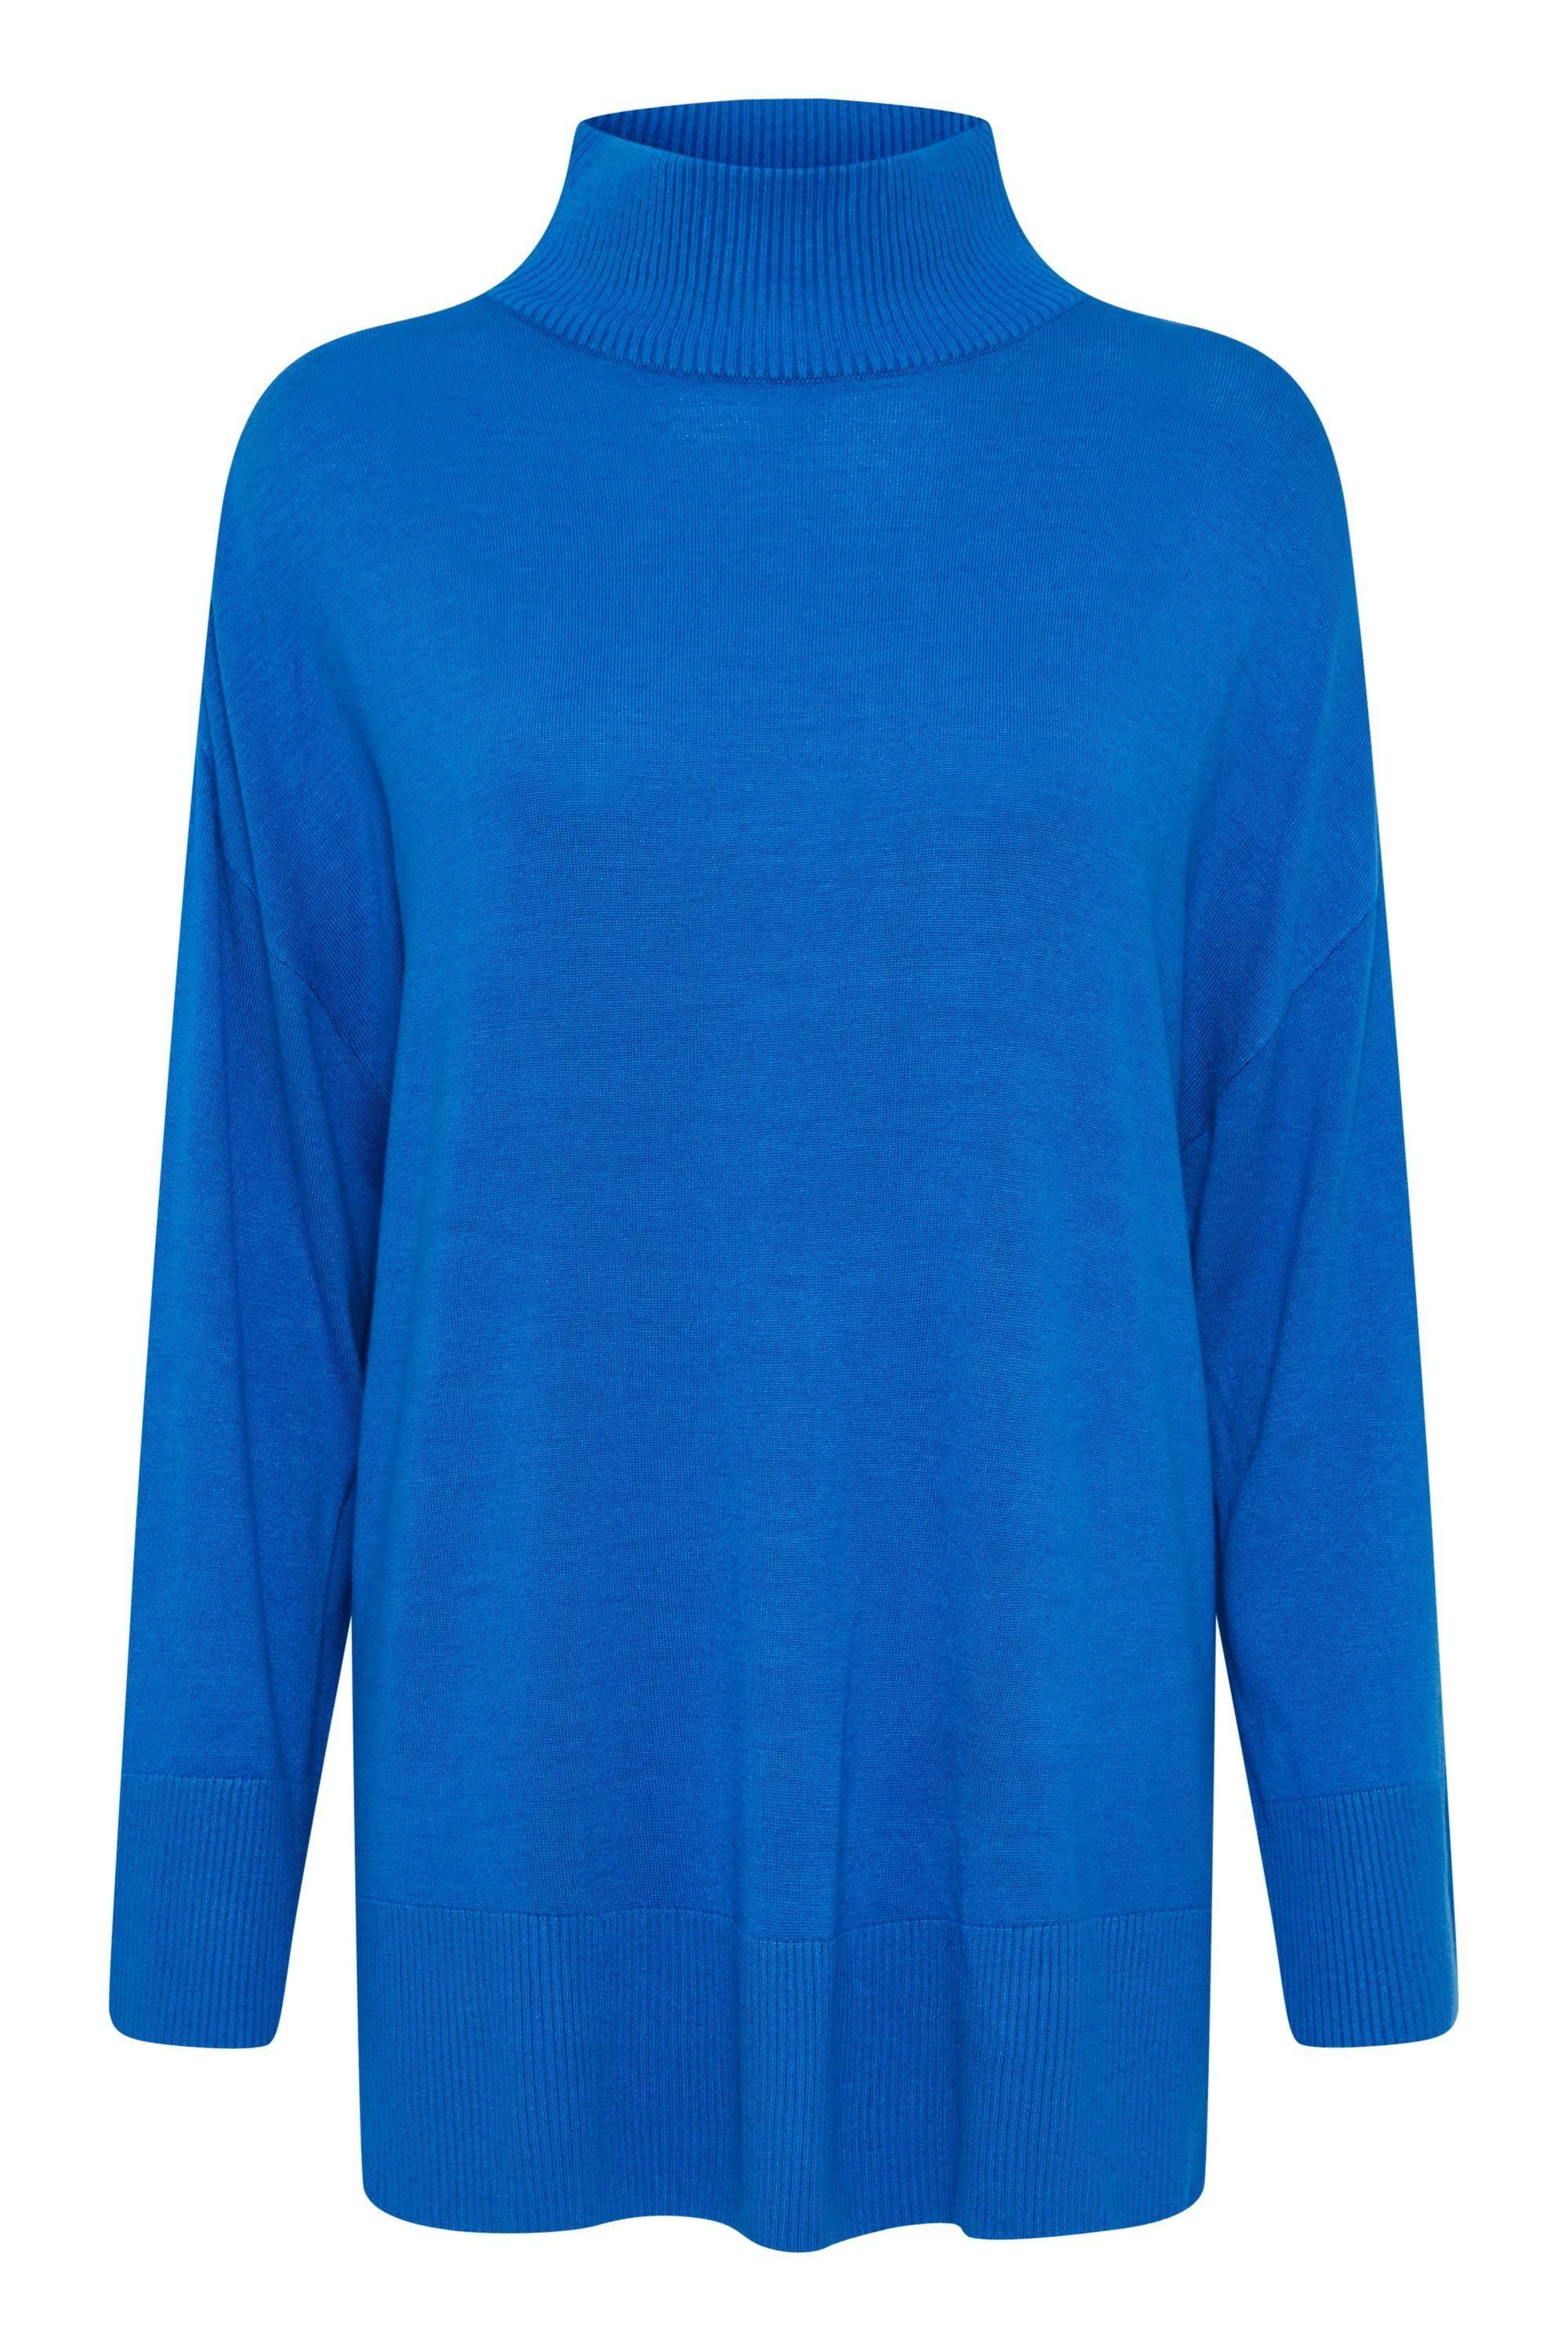 (194050) LOOSE TURTLENECK Nautical - b.young BYMMPIMBA1 Blue 20813512 Strickpullover